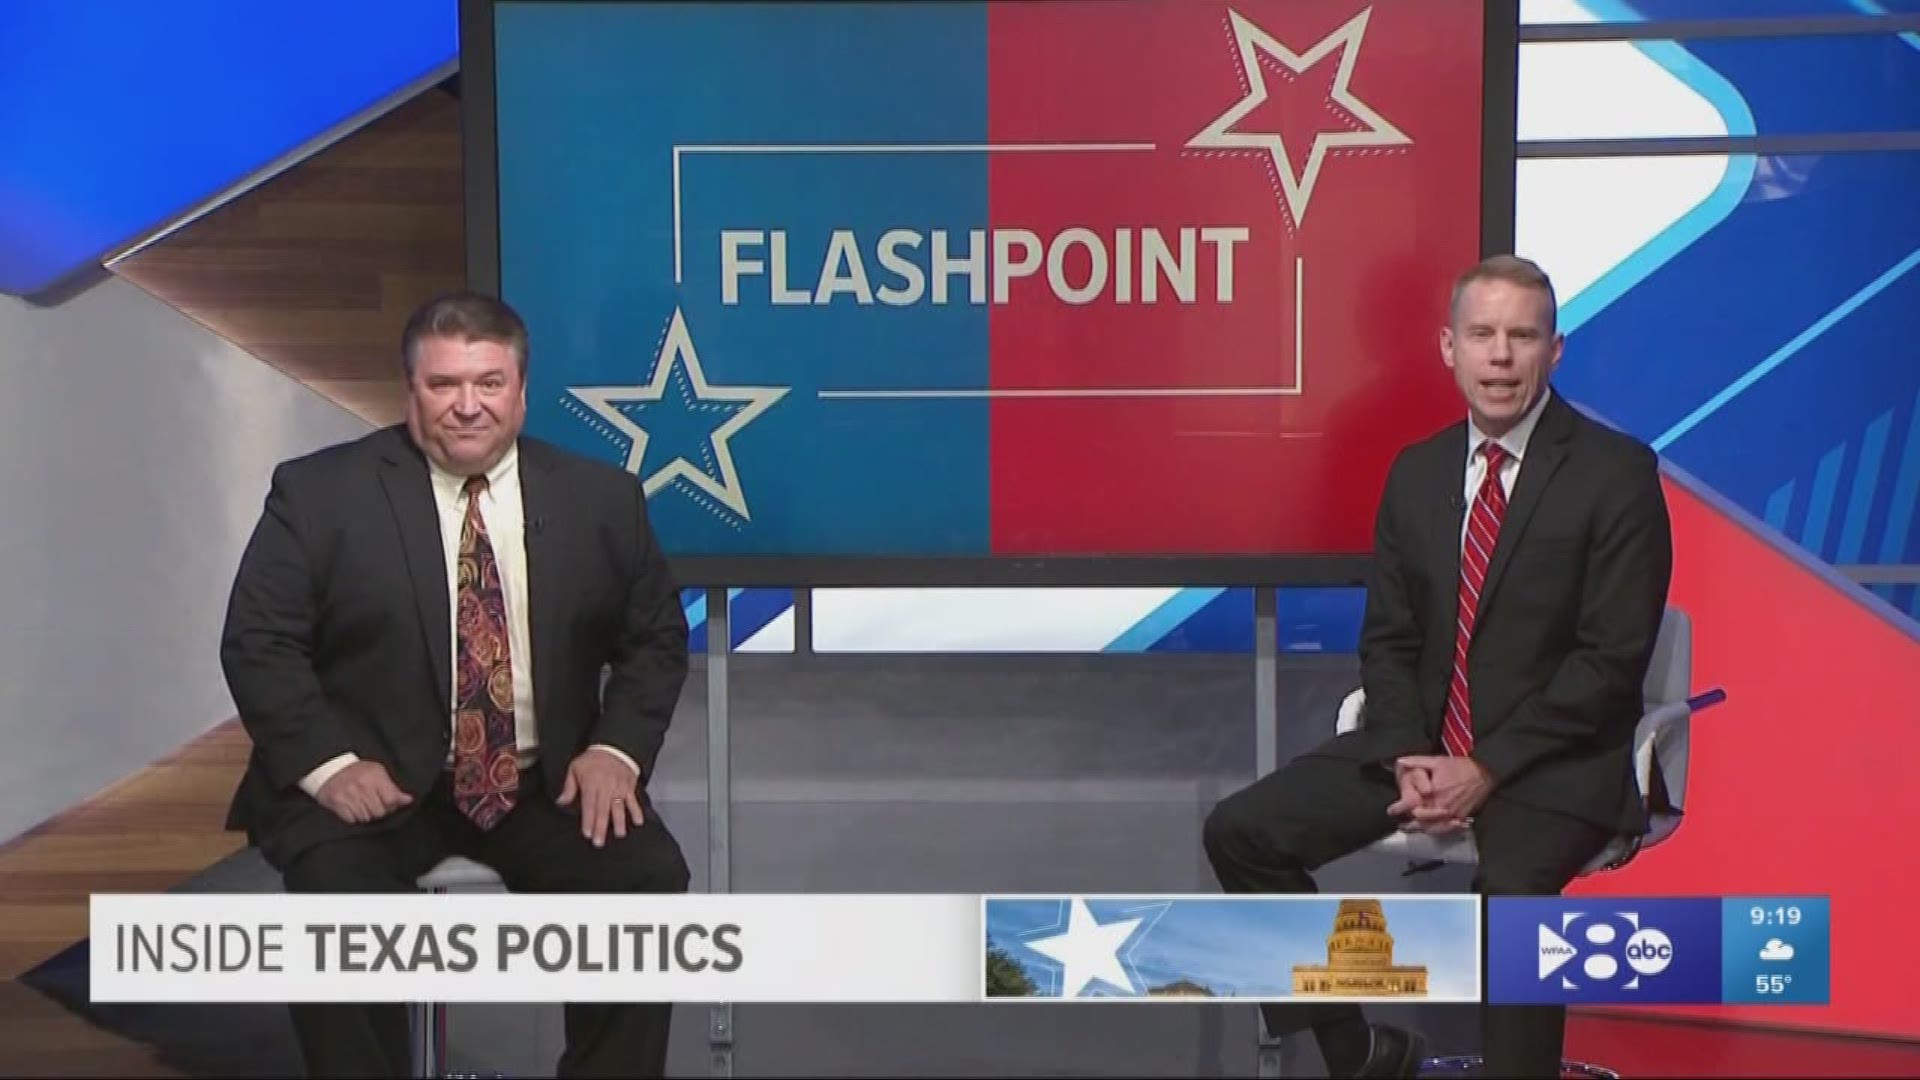 The big question in D.C. is impeachment. Wade Emmert, former chairman of Dallas County's Republican Party & Rich Hancock of VirtualNewsCenter.com discuss.